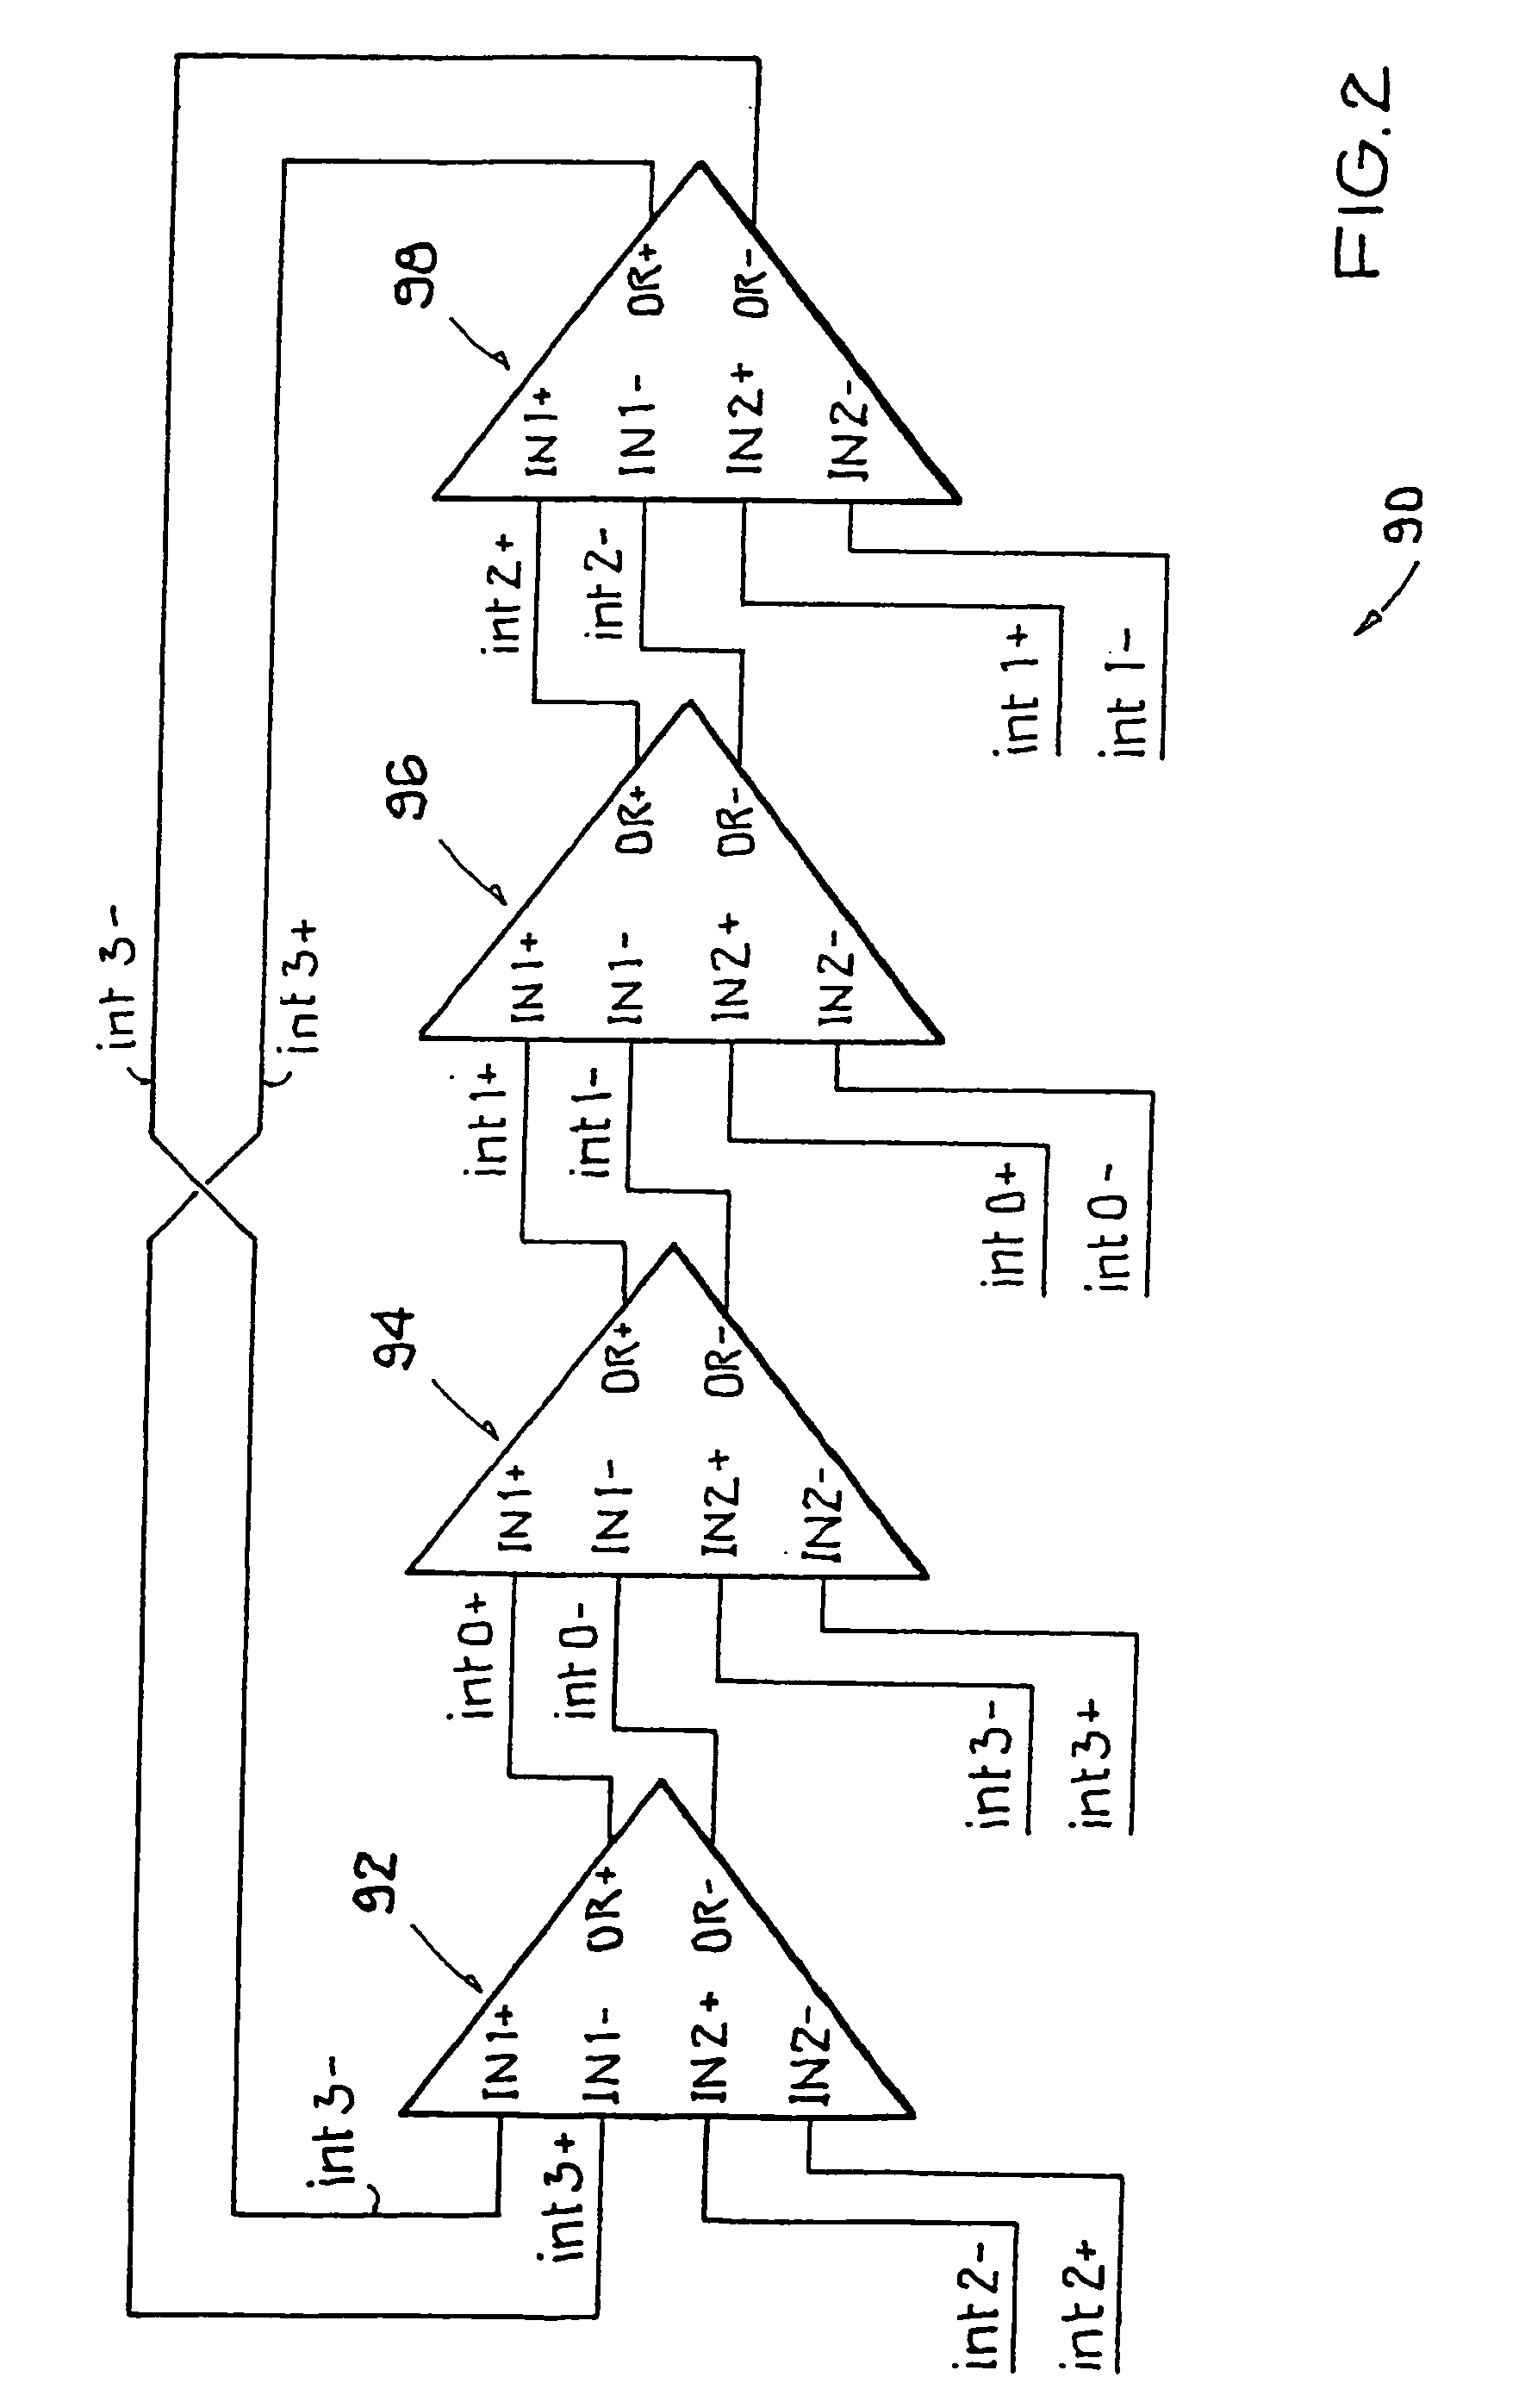 Circuit with at least one delay cell